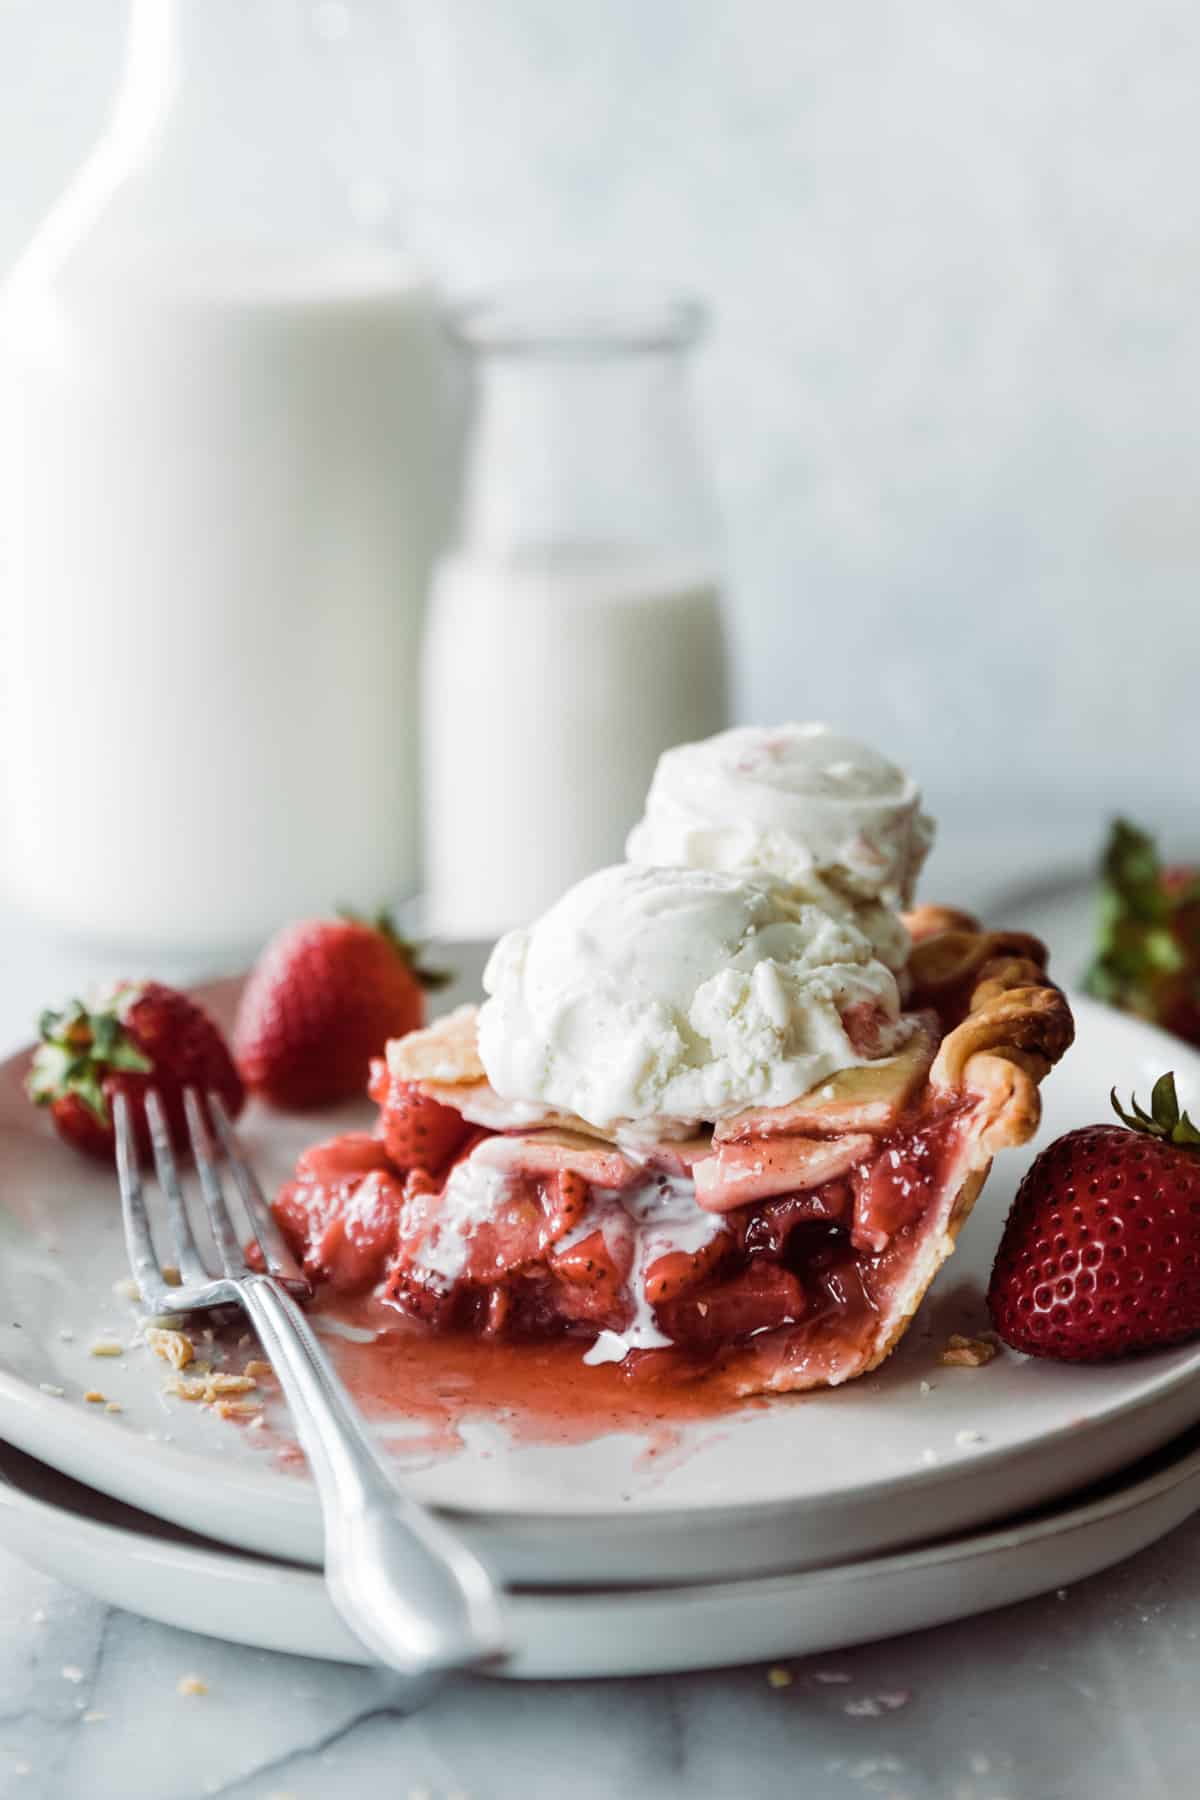 Slice of strawberry pie with dripping vanilla ice cream scoops on a dessert plate. 